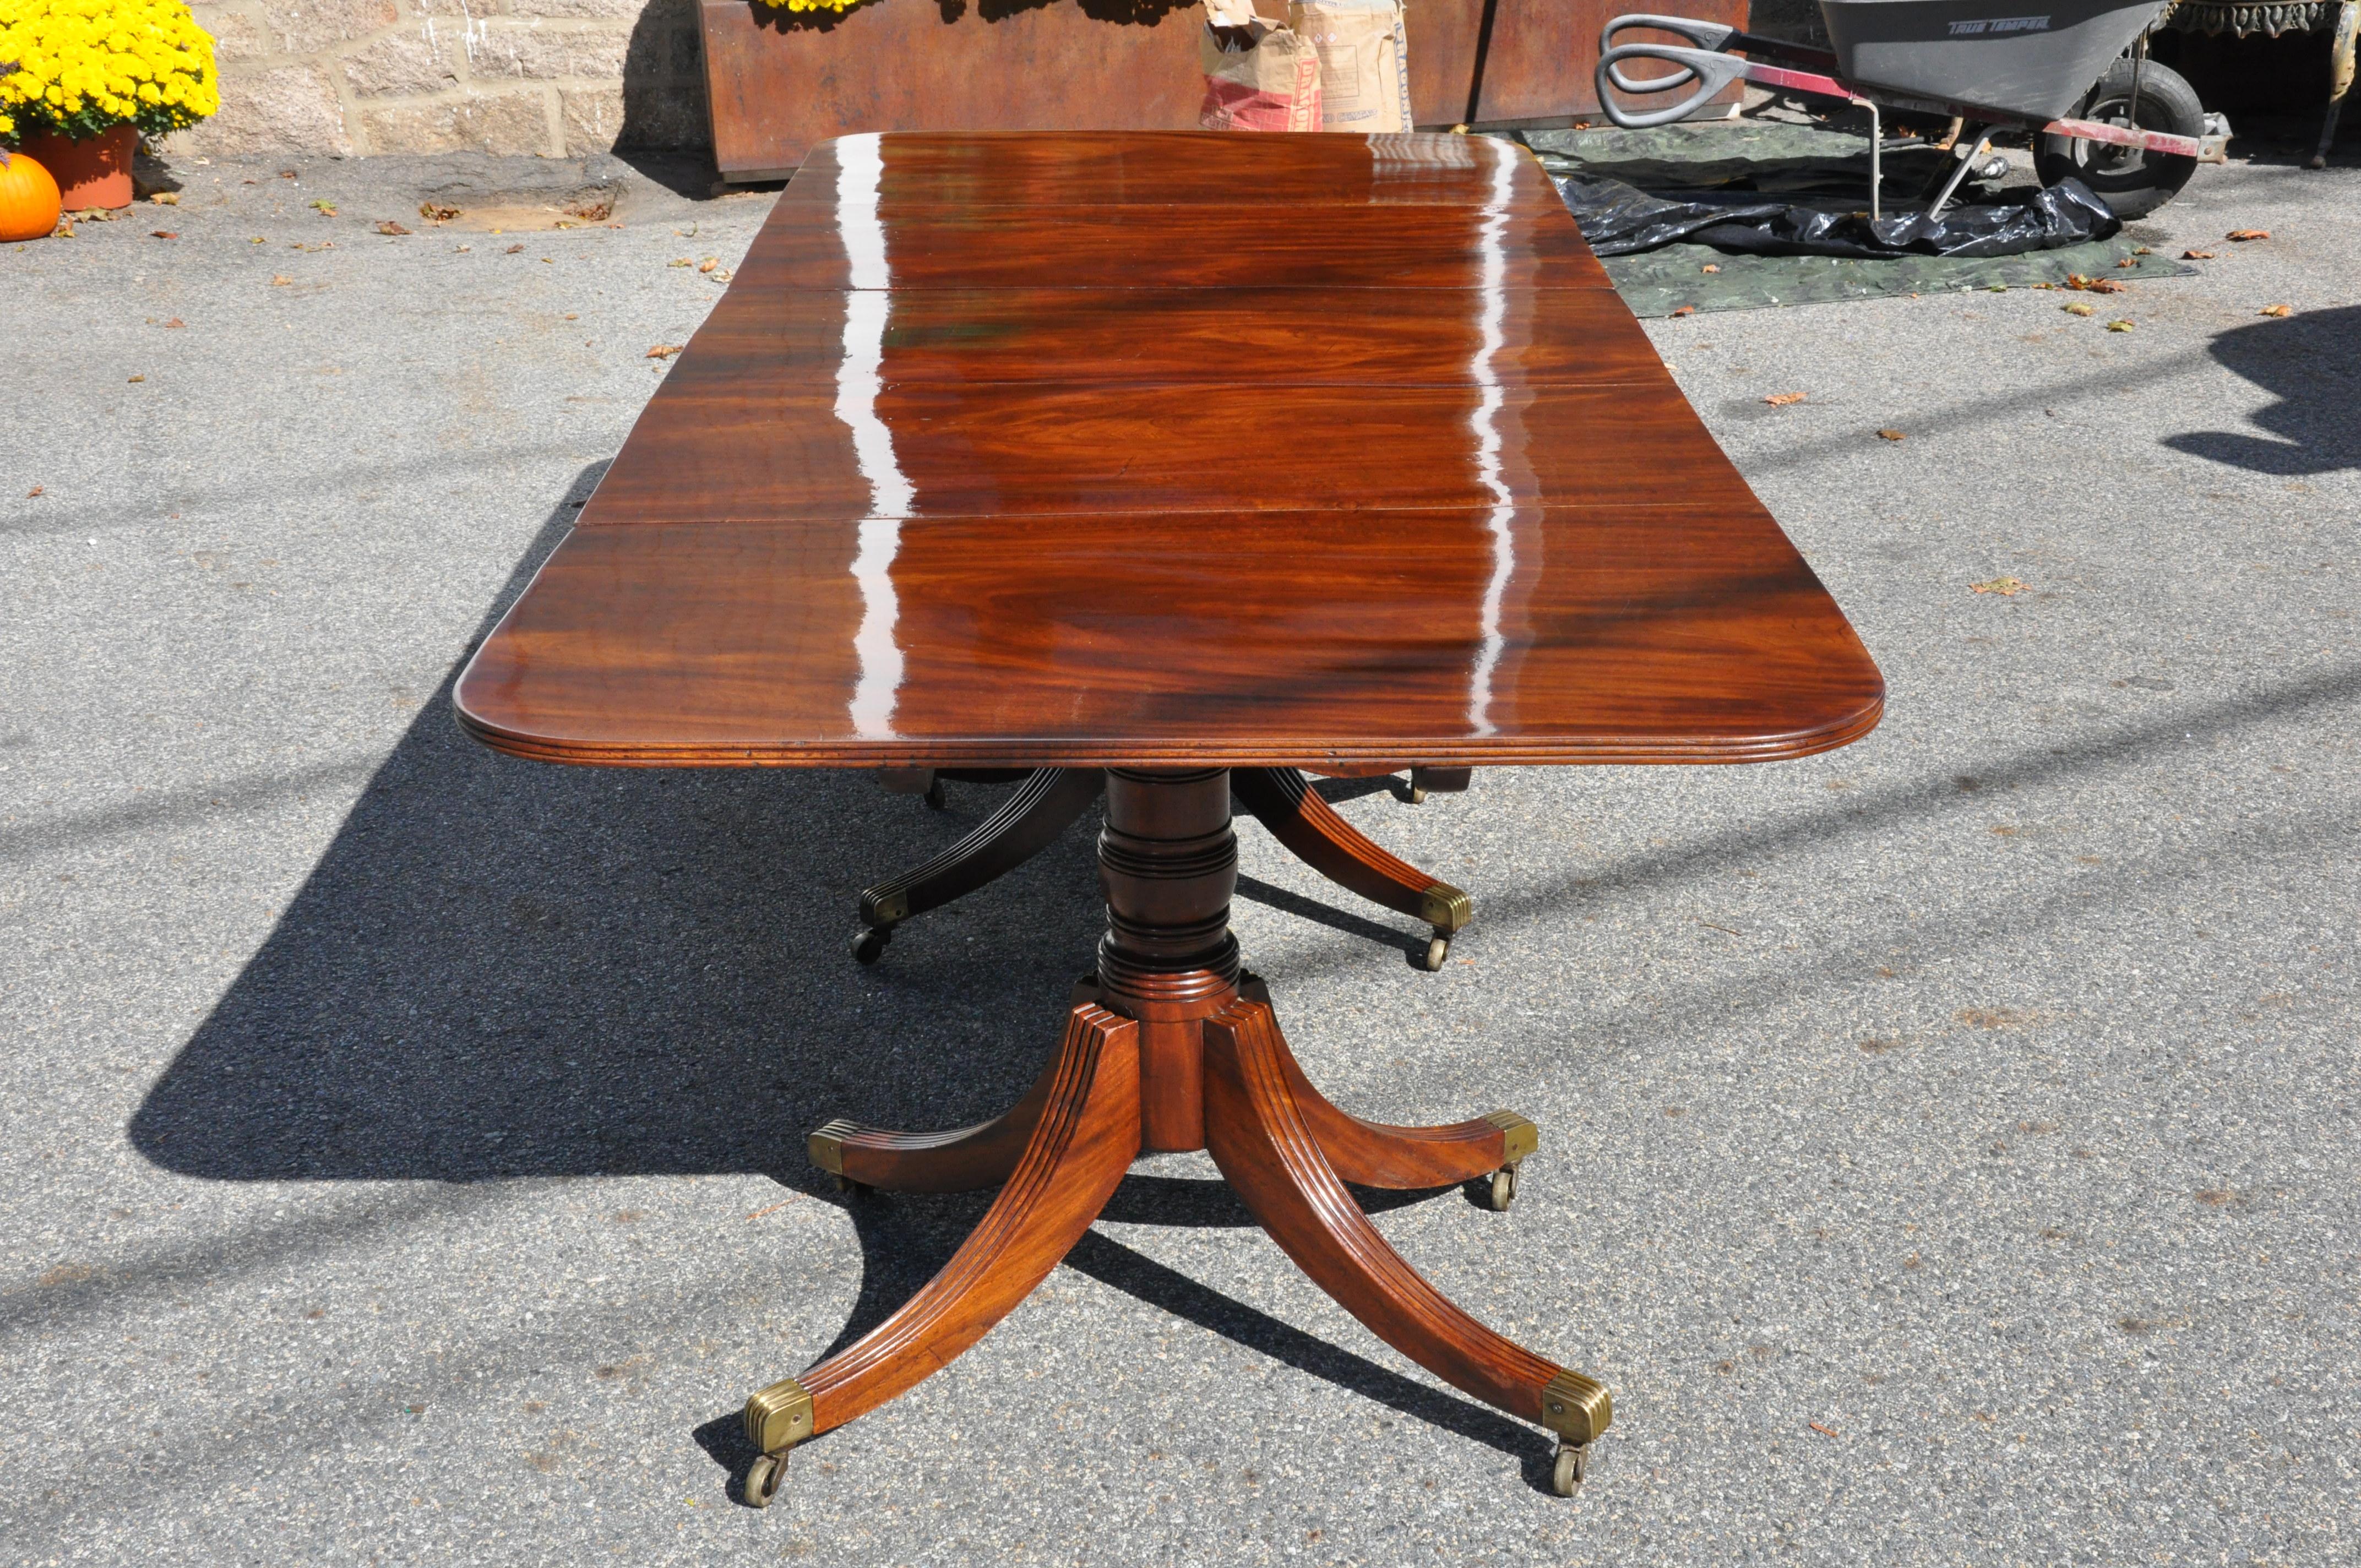 Period American or English three pedestal dining table with two additional leaves.
-- Original and Magnificent figuring of the mahogany boards. This remarkable table exists as a drop-leaf central section with two original end sections. The table